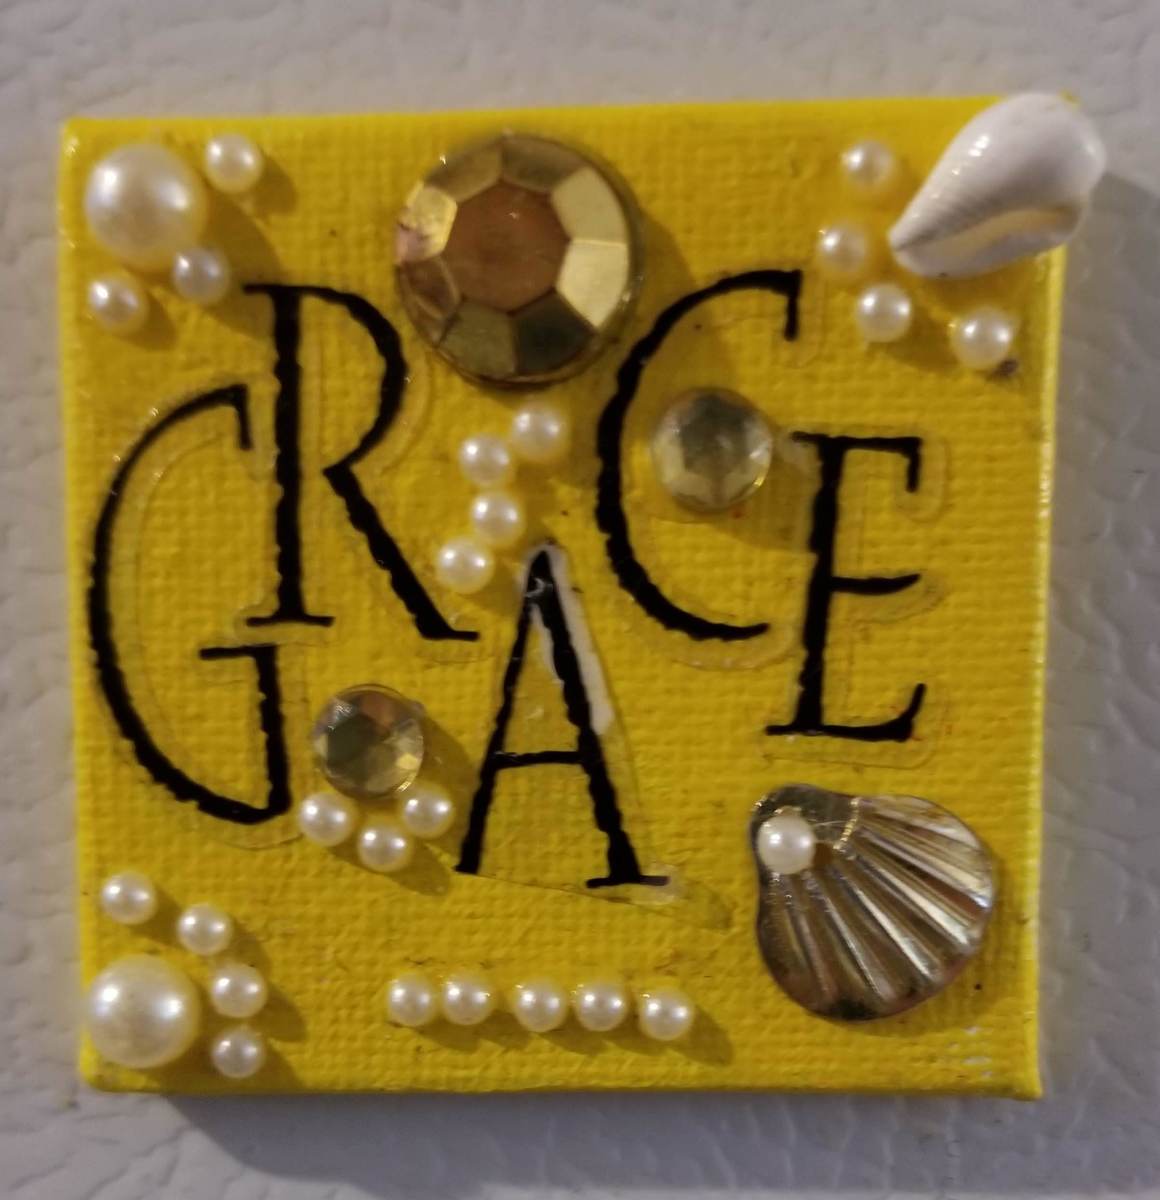 Remind yourself of the moments of Grace you've enjoyed on your path with a "Magic Words" fridge magnet.